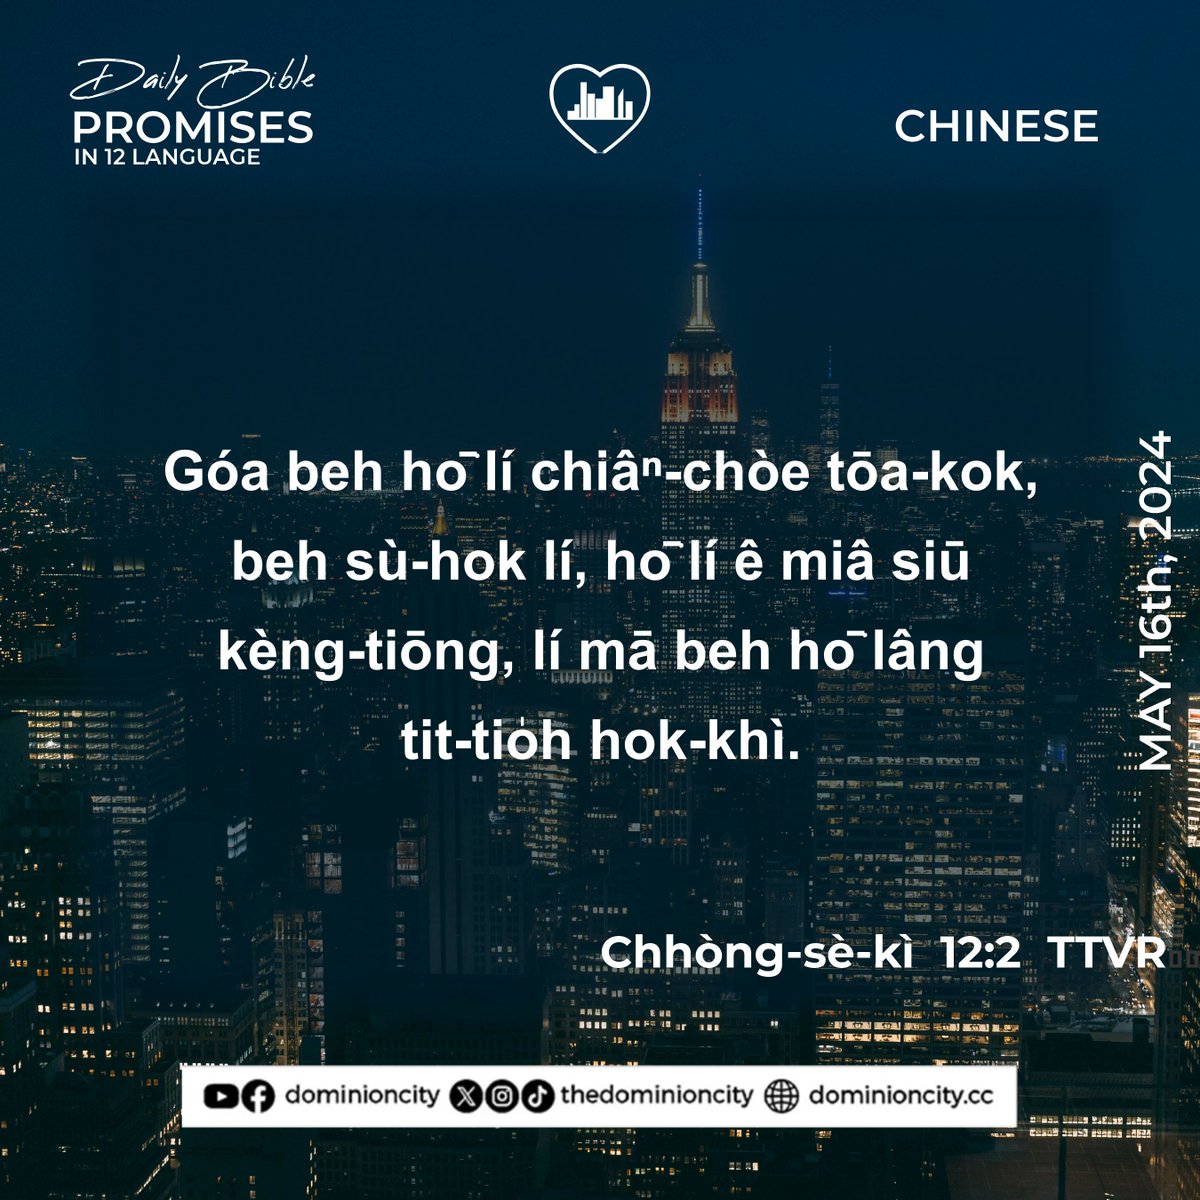 If you believe, type “AMEN”!

SET 1 of 3 | DAILY BIBLE PROMISES IN 12 LANGUAGES | MAY 16TH 2024 | LIKE, FOLLOW & SHARE

#Bible #GodsWord #trendingnow #Biblepromises #trendingreels #hope #love #faith #GoodNews #NewsUpdate